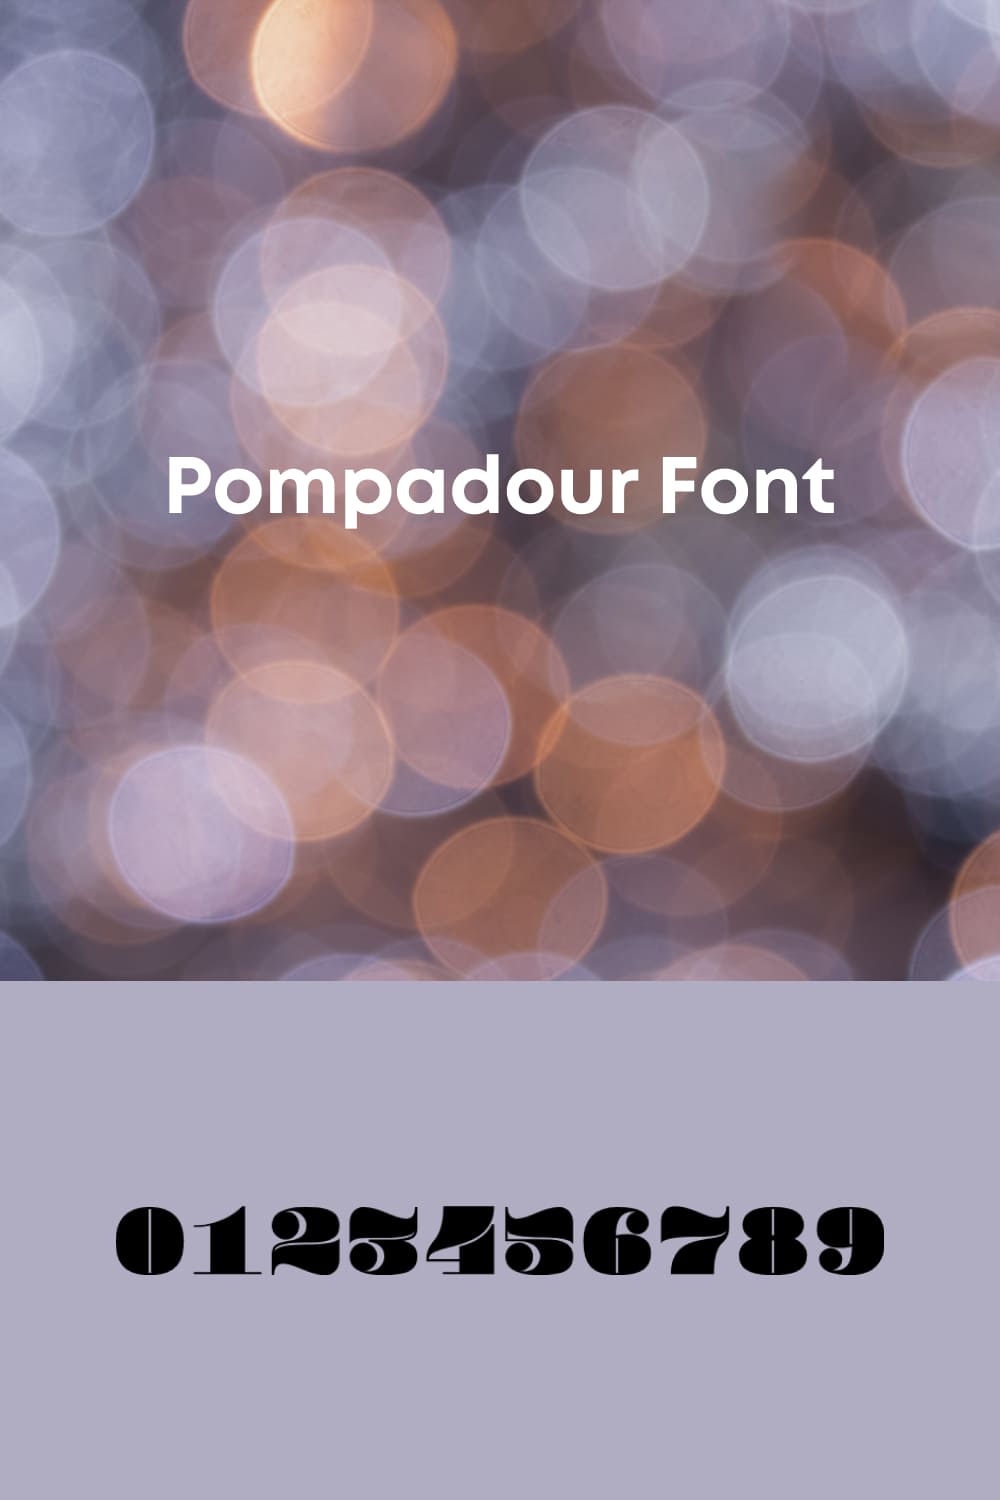 An example of a Pompadour Numerals font against a background of color highlights.